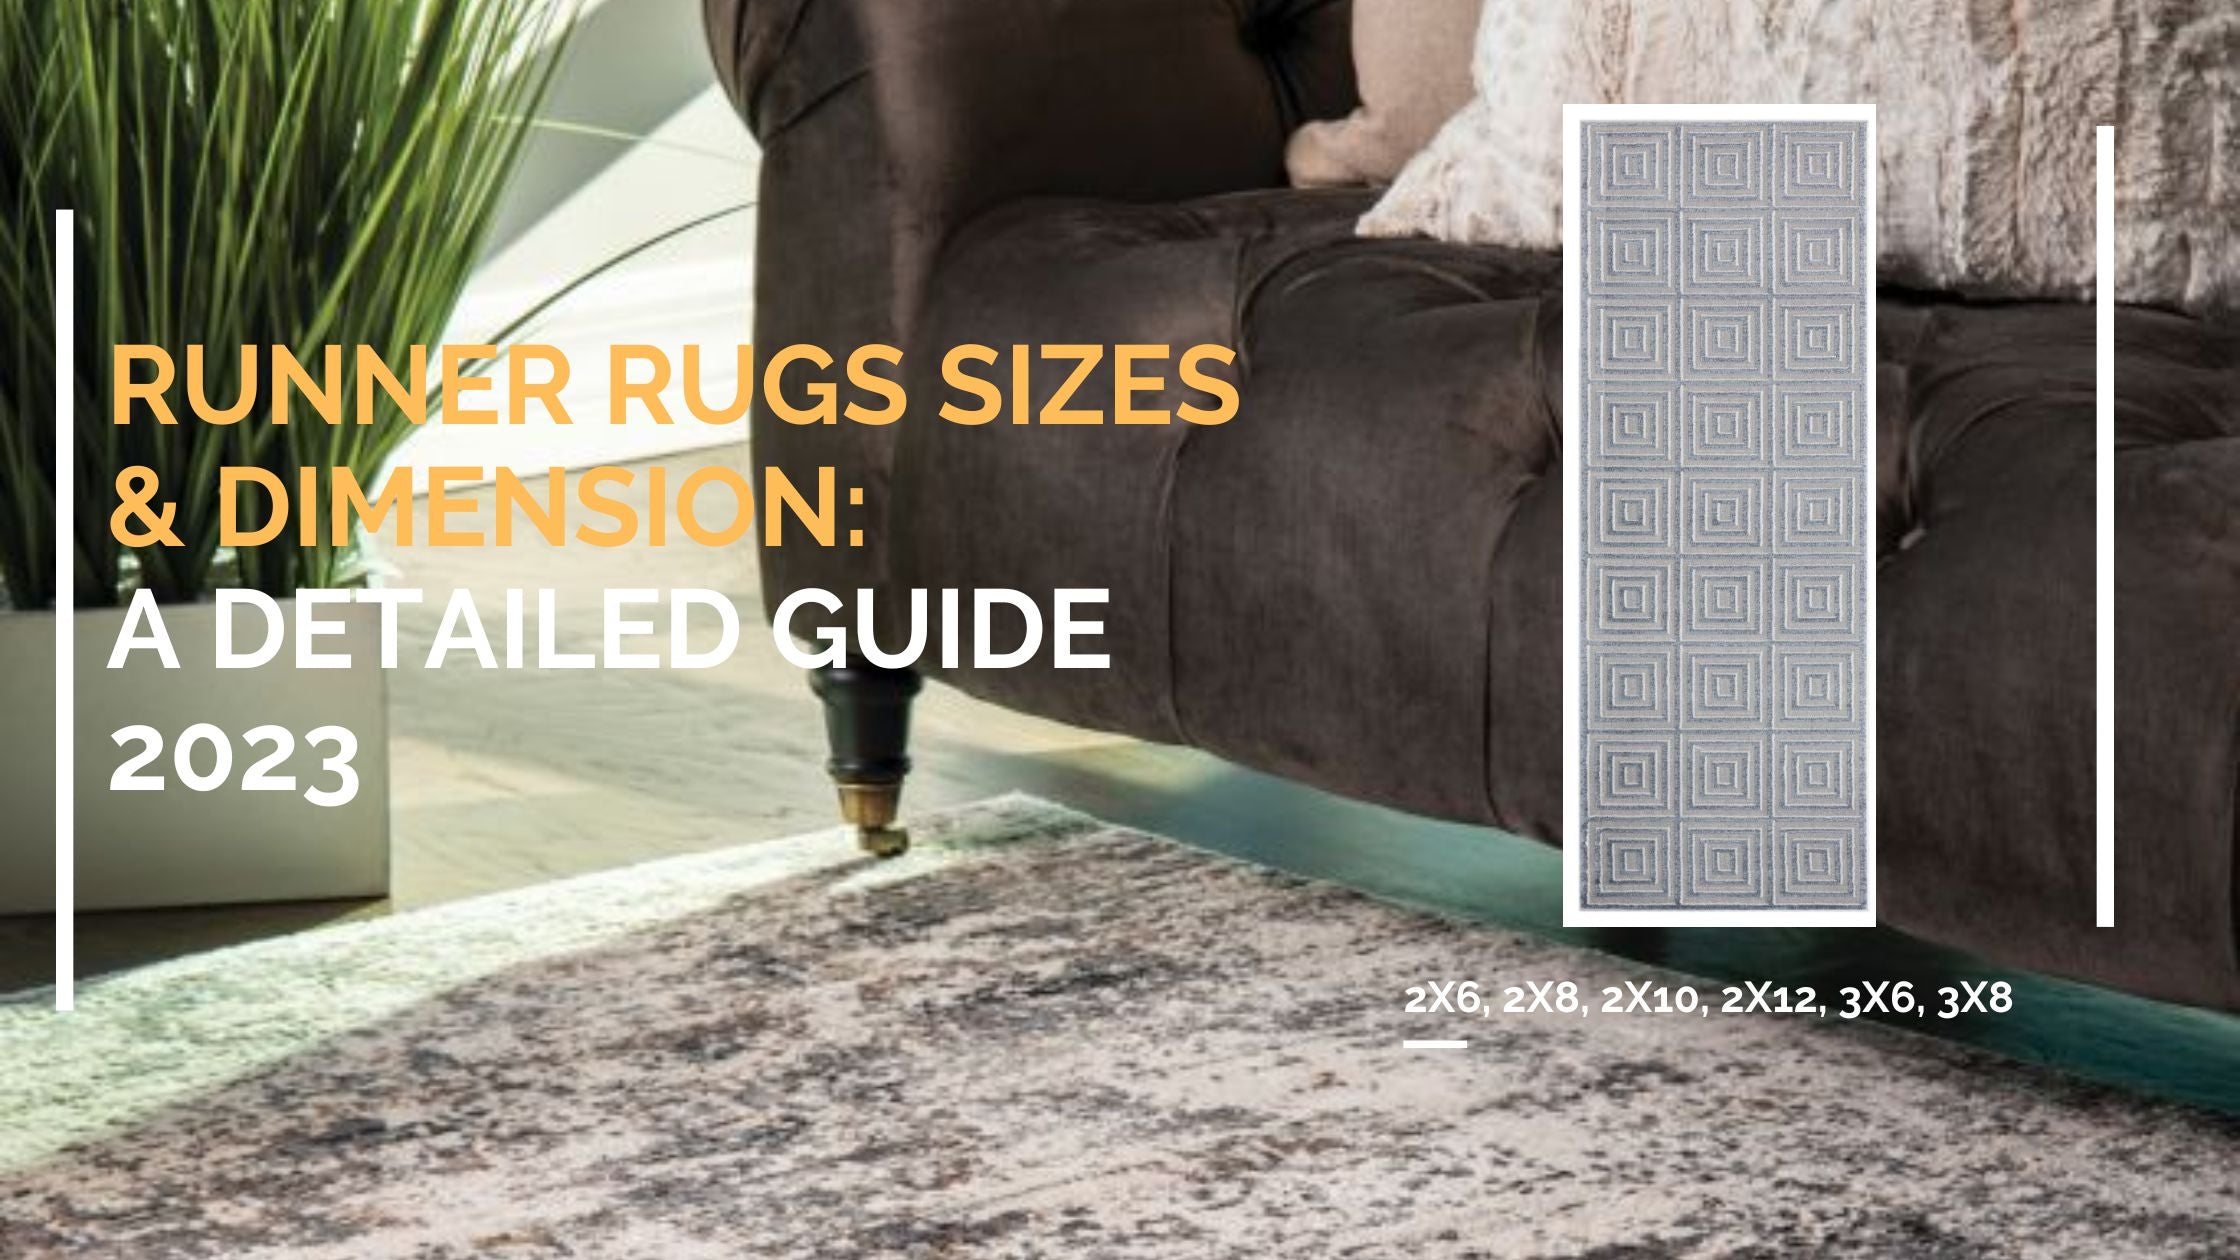 Runner Rug Sizes Dimensions And All You Need To Know In 2023 Gallery